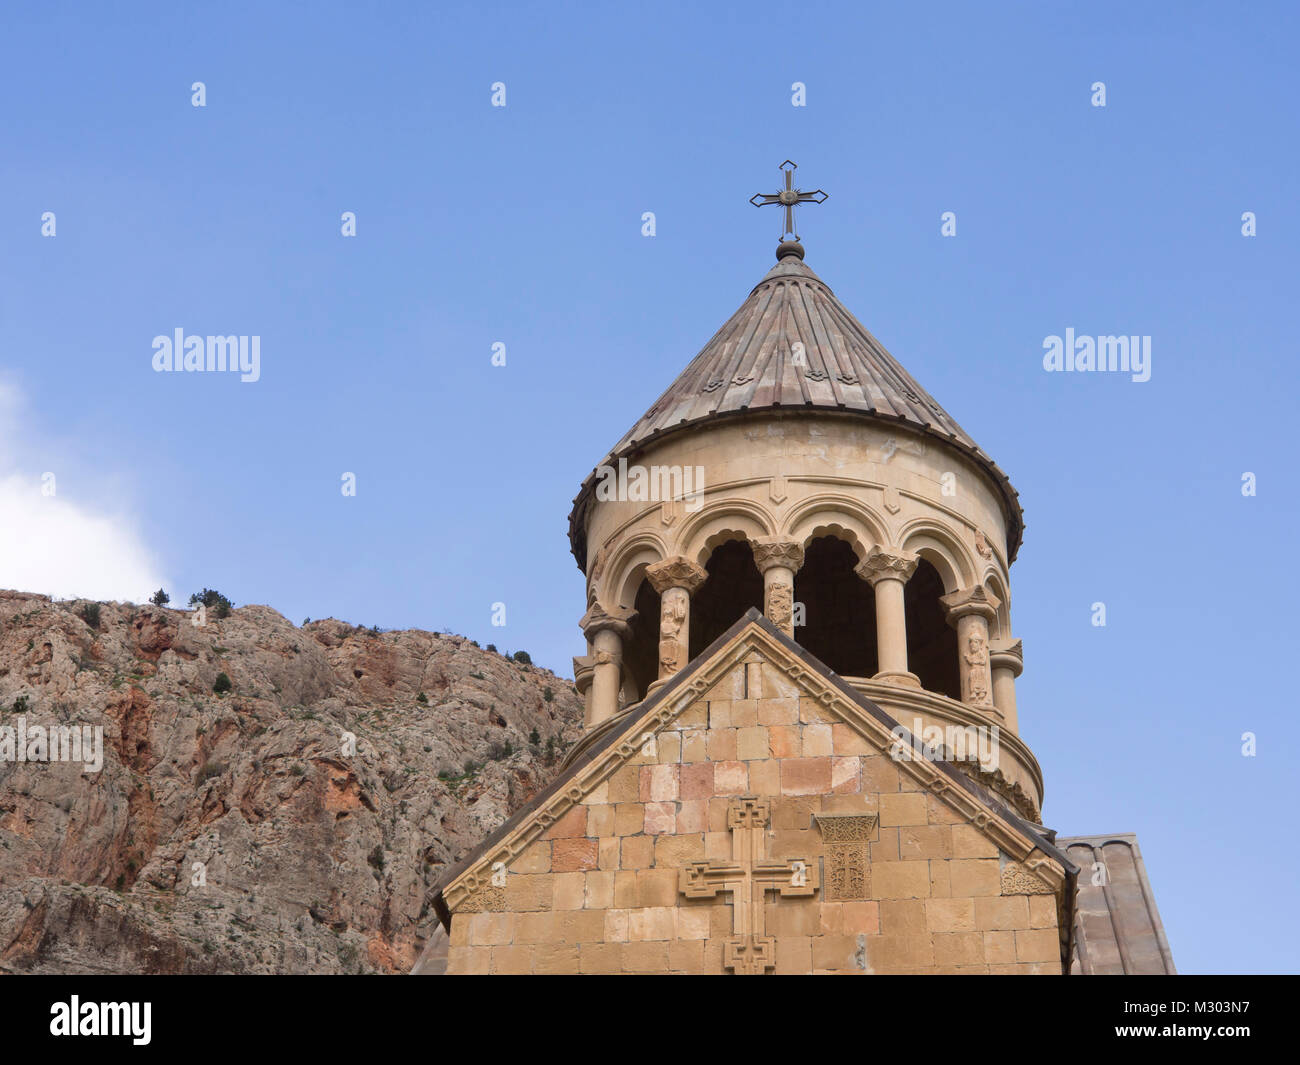 Noravank Monastery in southern Armenia, facade detail of the Surb Astvatsatsin Church with red cliff walls and blue sky Stock Photo